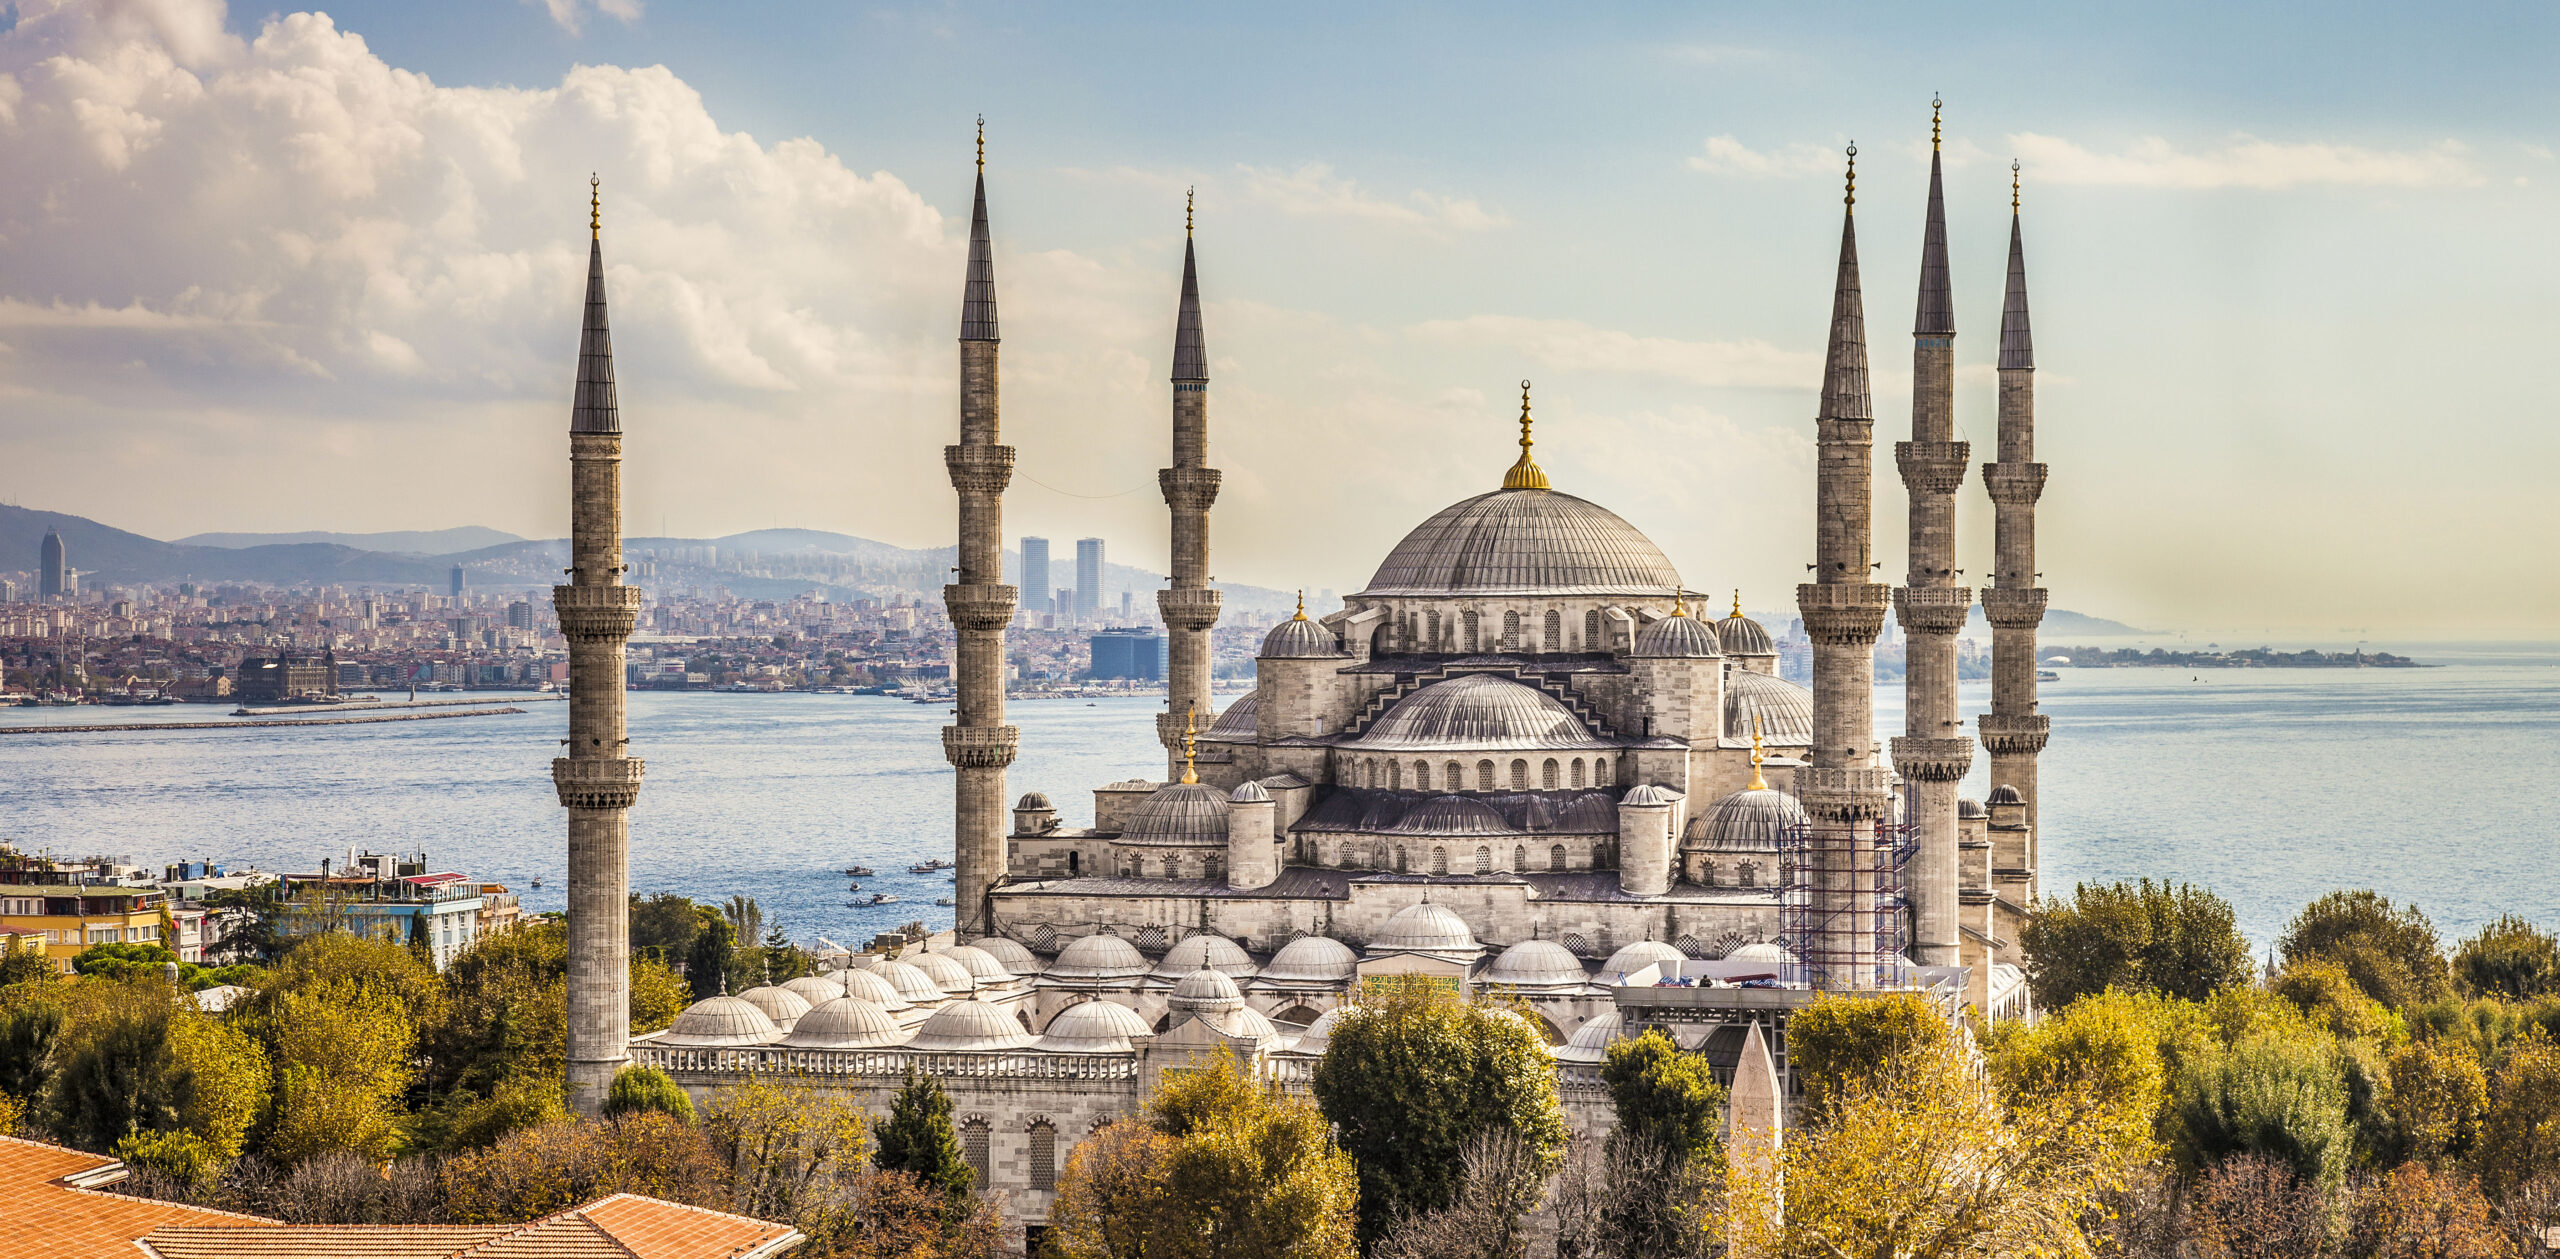 Which historic neighborhood in Istanbul is famous for its lively nightlife, trendy bars, and restaurants?